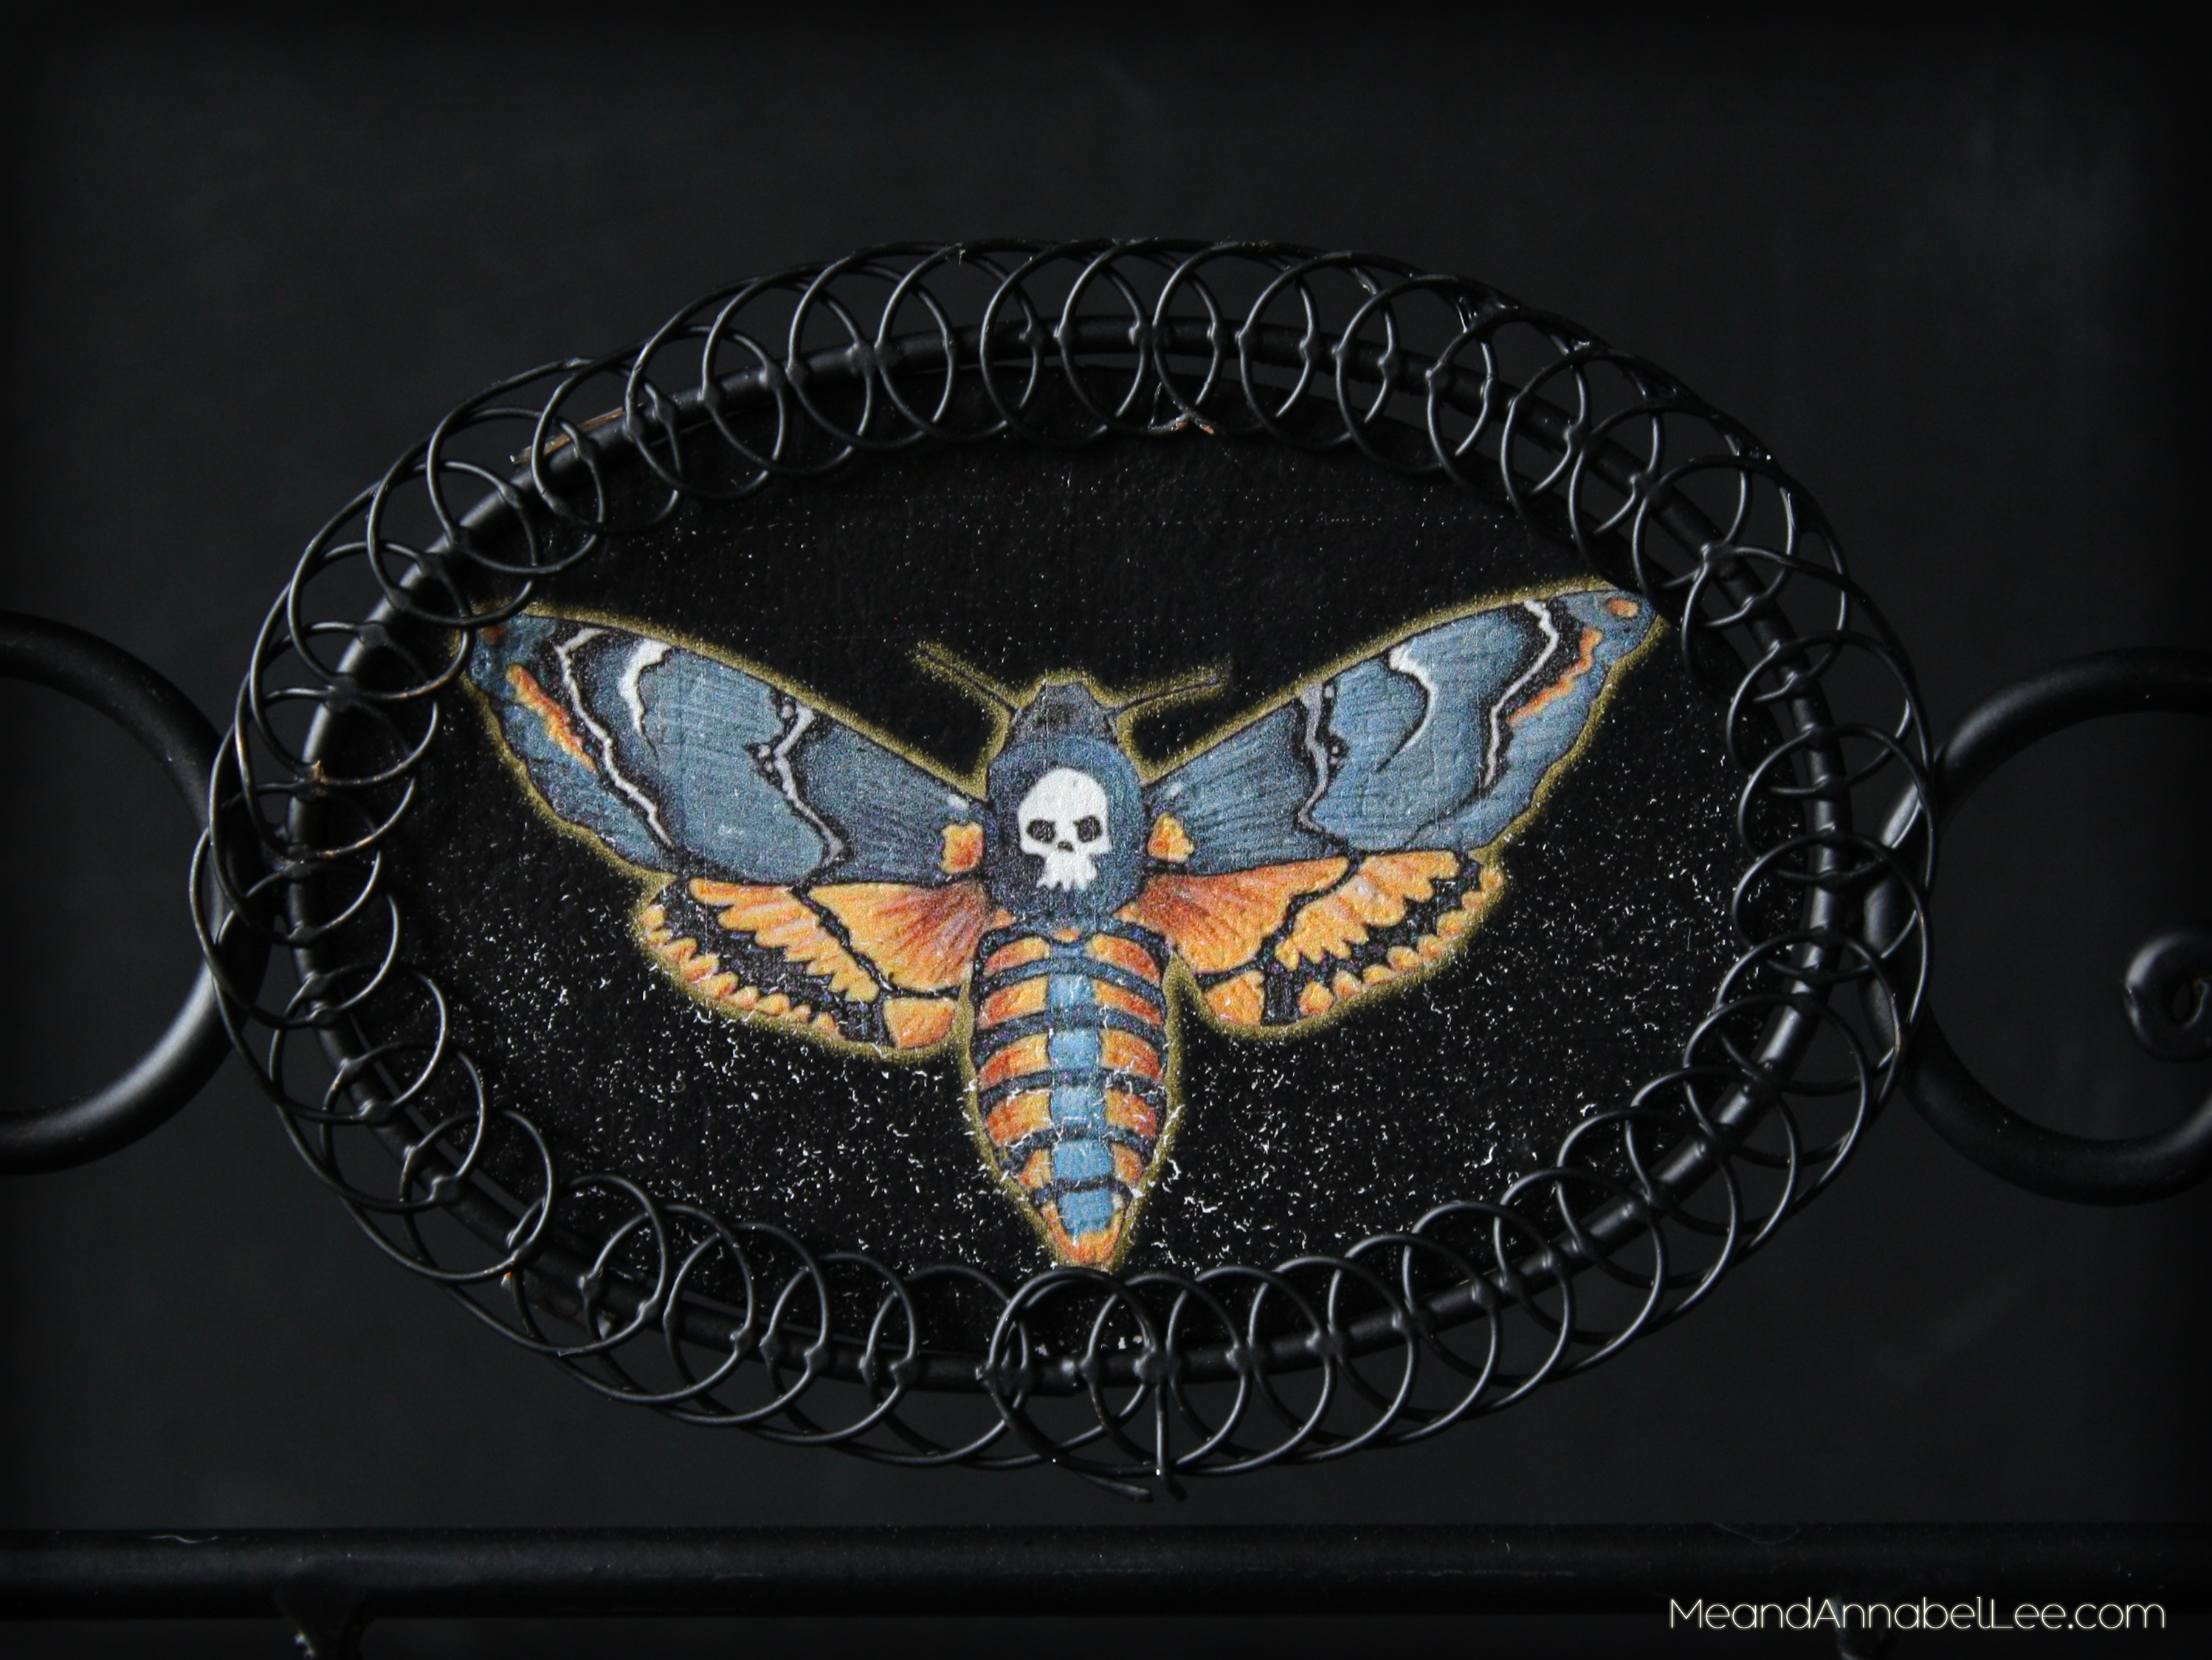 DIY Death's Head Moth Book Stand - How to Transfer an Image to Metal using a Waterslide Decal - Goth It Yourself - Gothic DIY - Skull - Trash to Treasure Transformation - www.MeandAnnabelLee.com - Blog for all things Dark, Gothic, Victorian, & Unusual